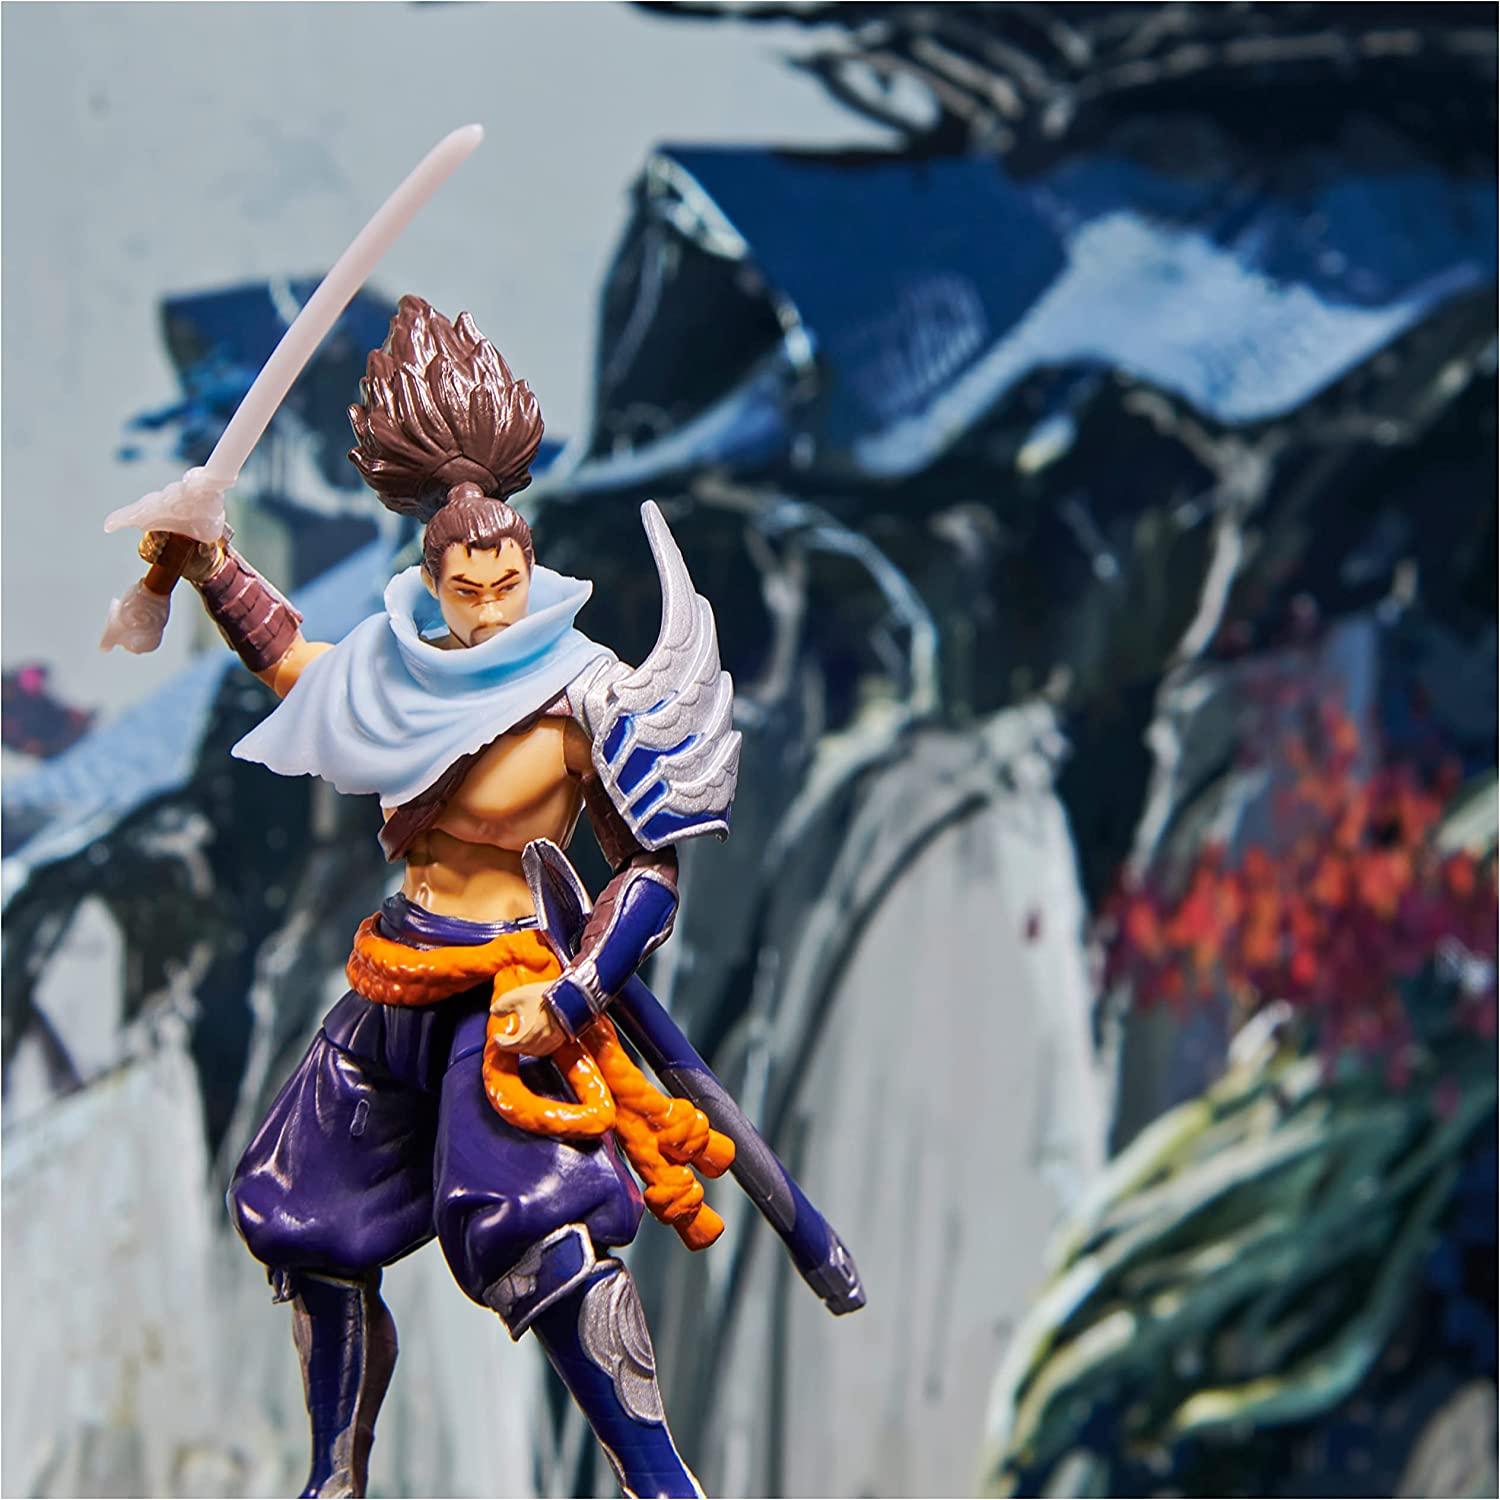 League of Legends, 4-Inch Yasuo Collectible Figure w/ Premium Details and Sword Accessory, The Champion Collection - BumbleToys - 5-7 Years, Boys, Characters, collectible, collectors, EXO, Figures, LEAGUE OF LEGENDS, zed